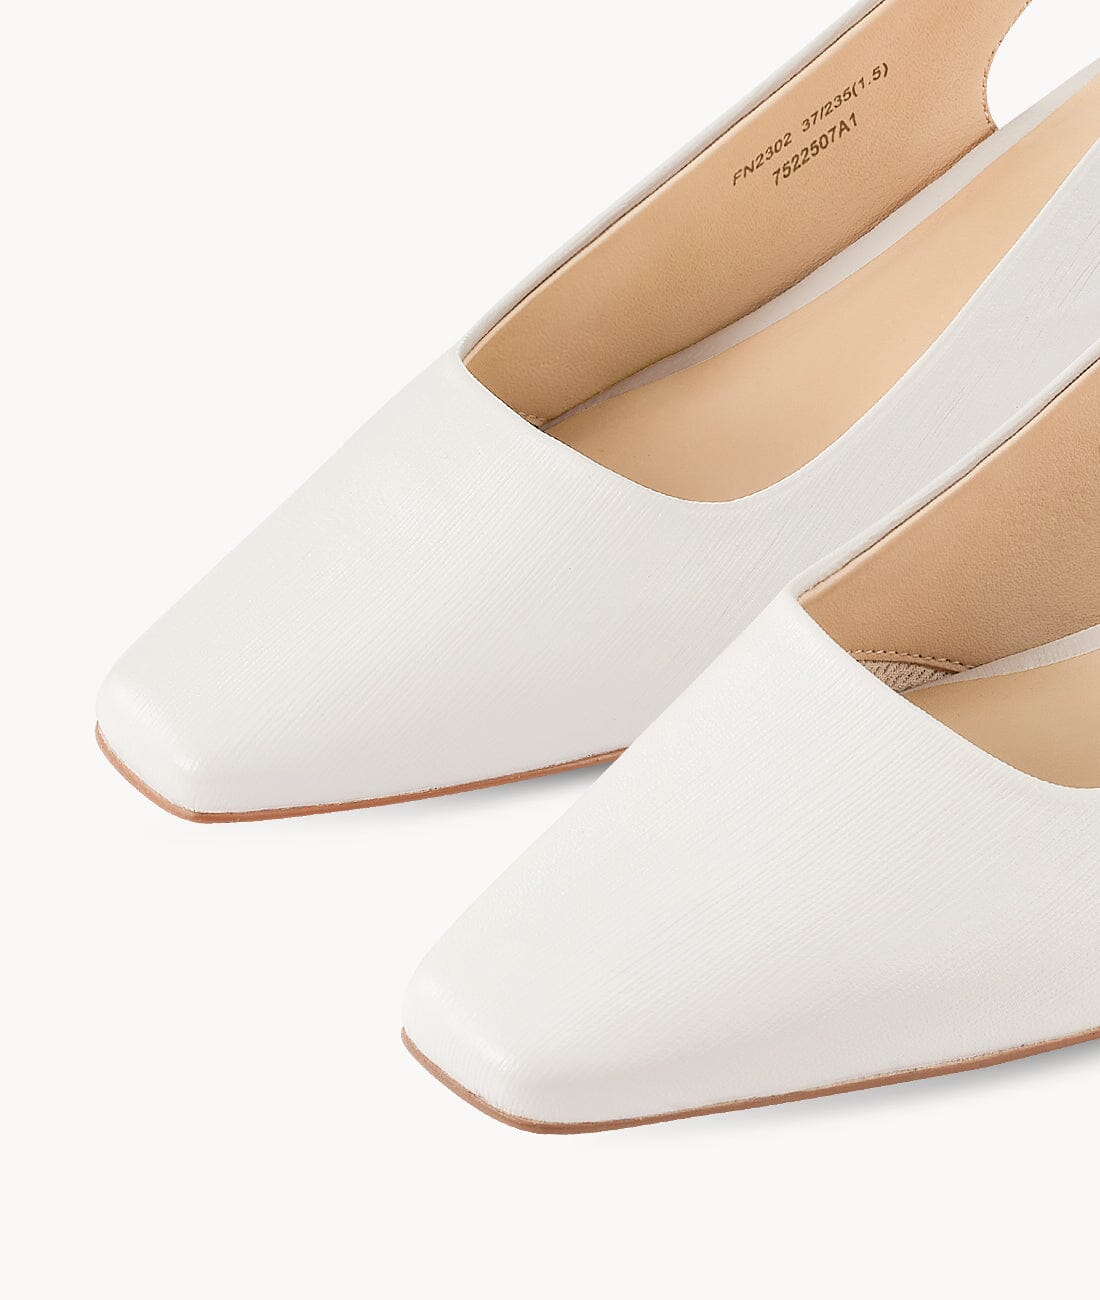 AIR-TOUCH FOAM 5CM white SLINGBACKS - Blanched Almond Pumps 7or9 